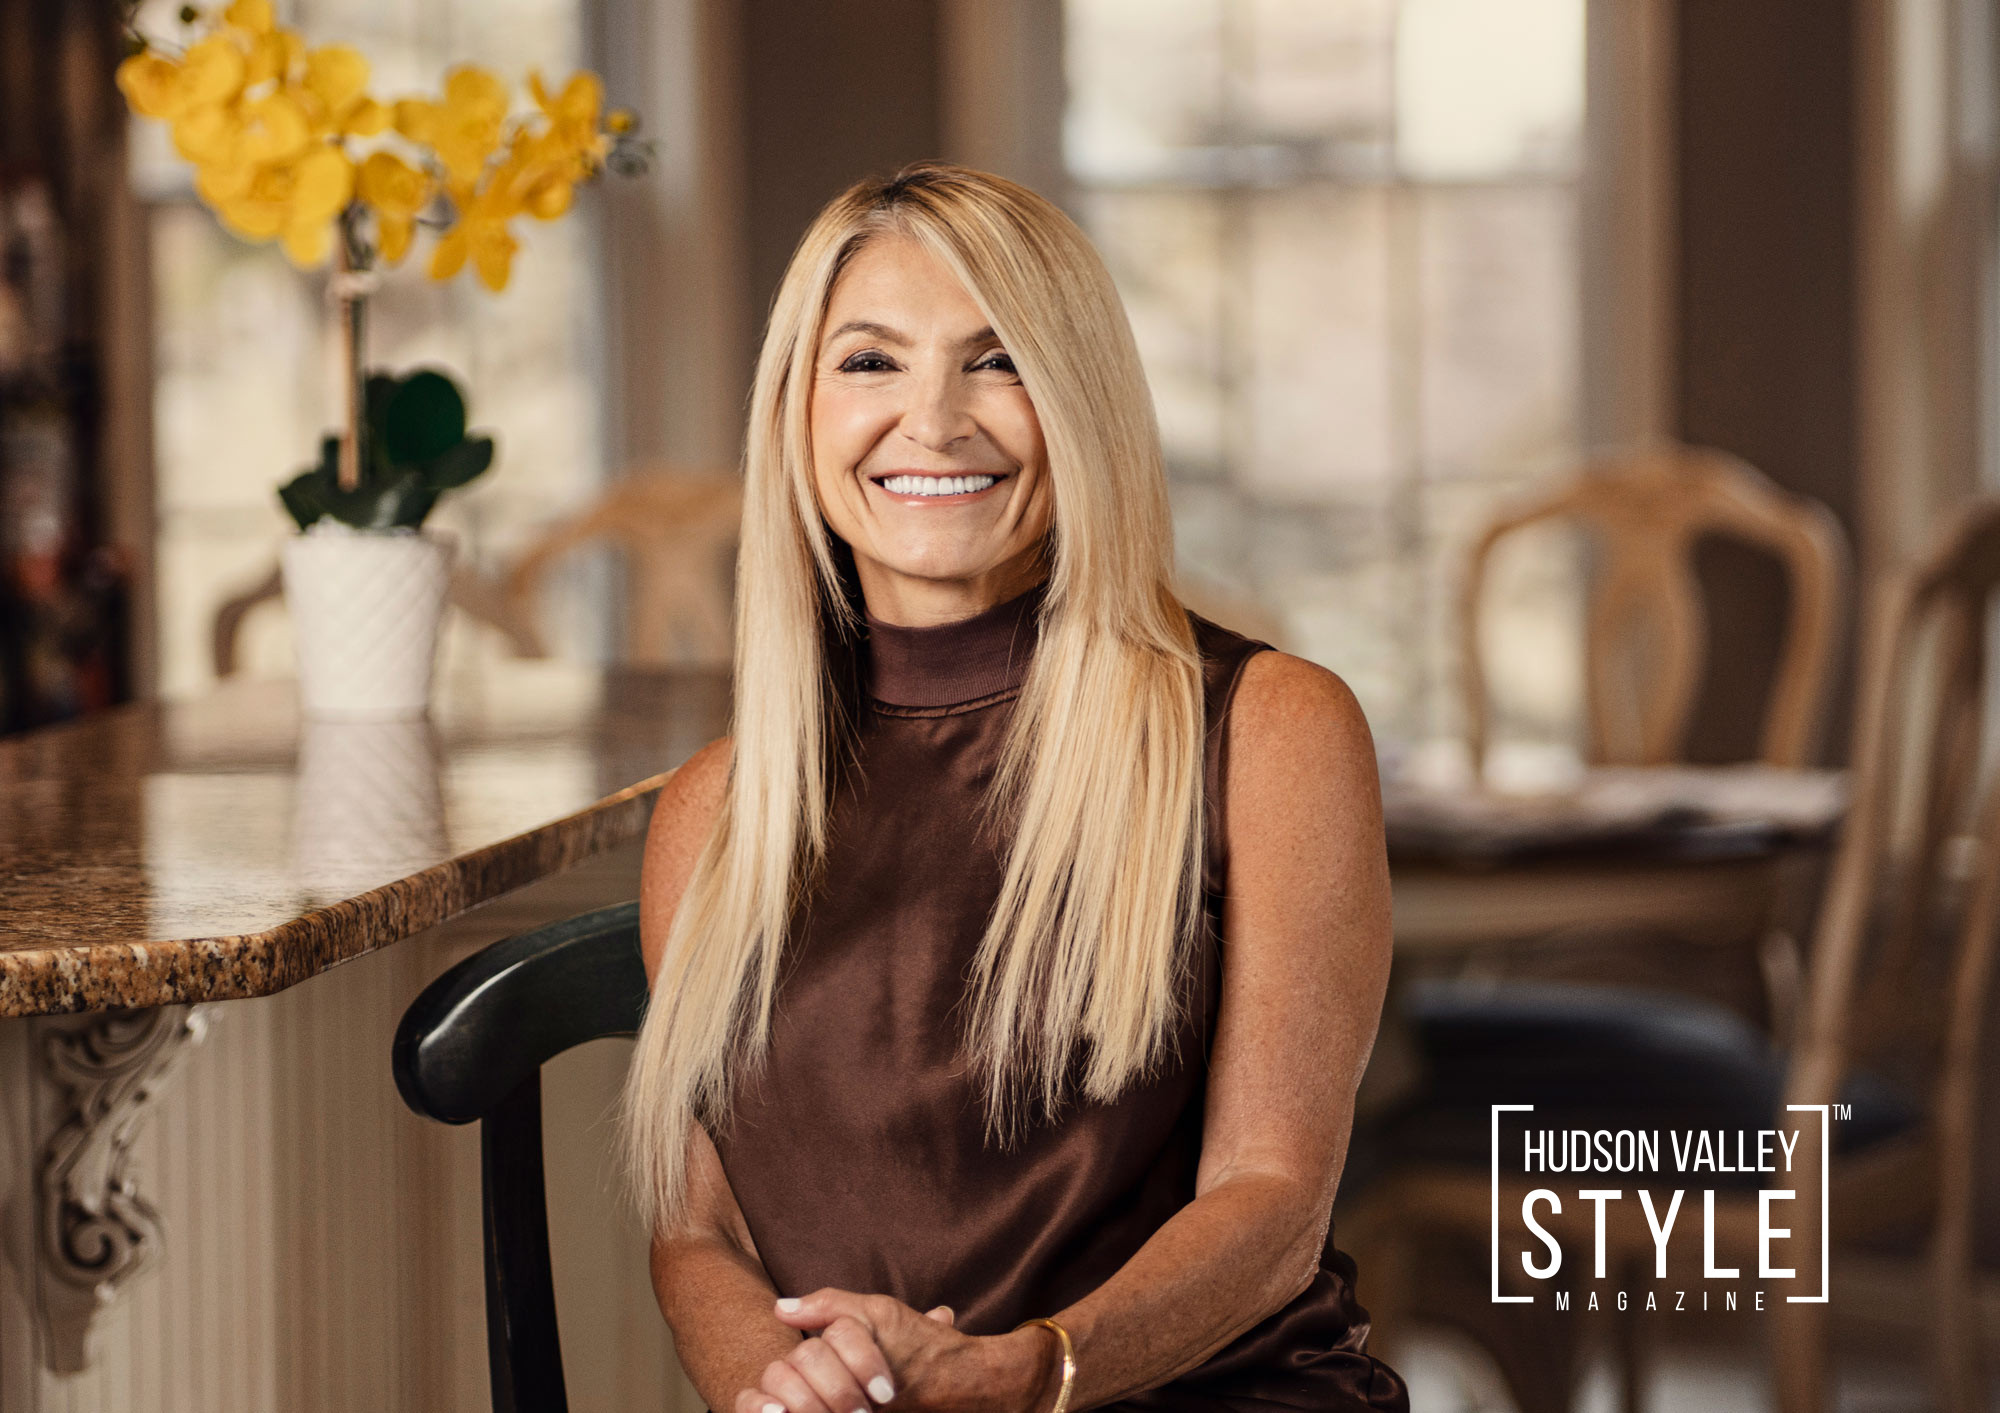 Mortgage Broker Lisa Ferrara Shares Spring Home Decorating Tips for an Authentic Hudson Valley Style Home – Presented by Superior Mortgage Company Inc. NMLS #43642 – Photography by Duncan Avenue Studios